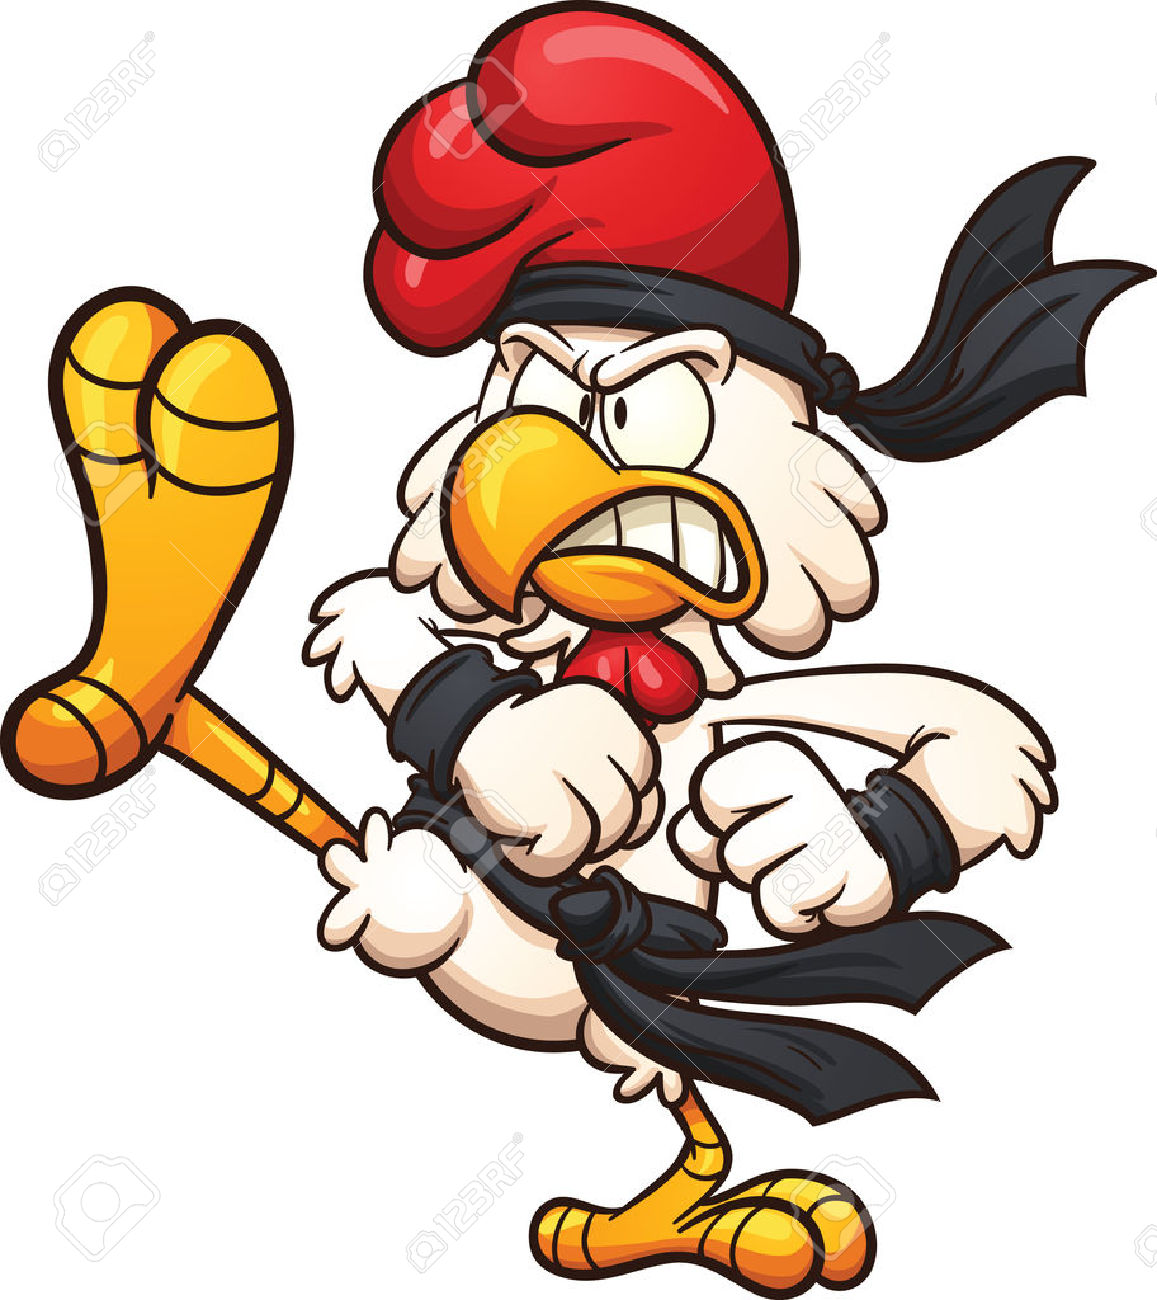 Clipart chicken mad. Angry baby clip art